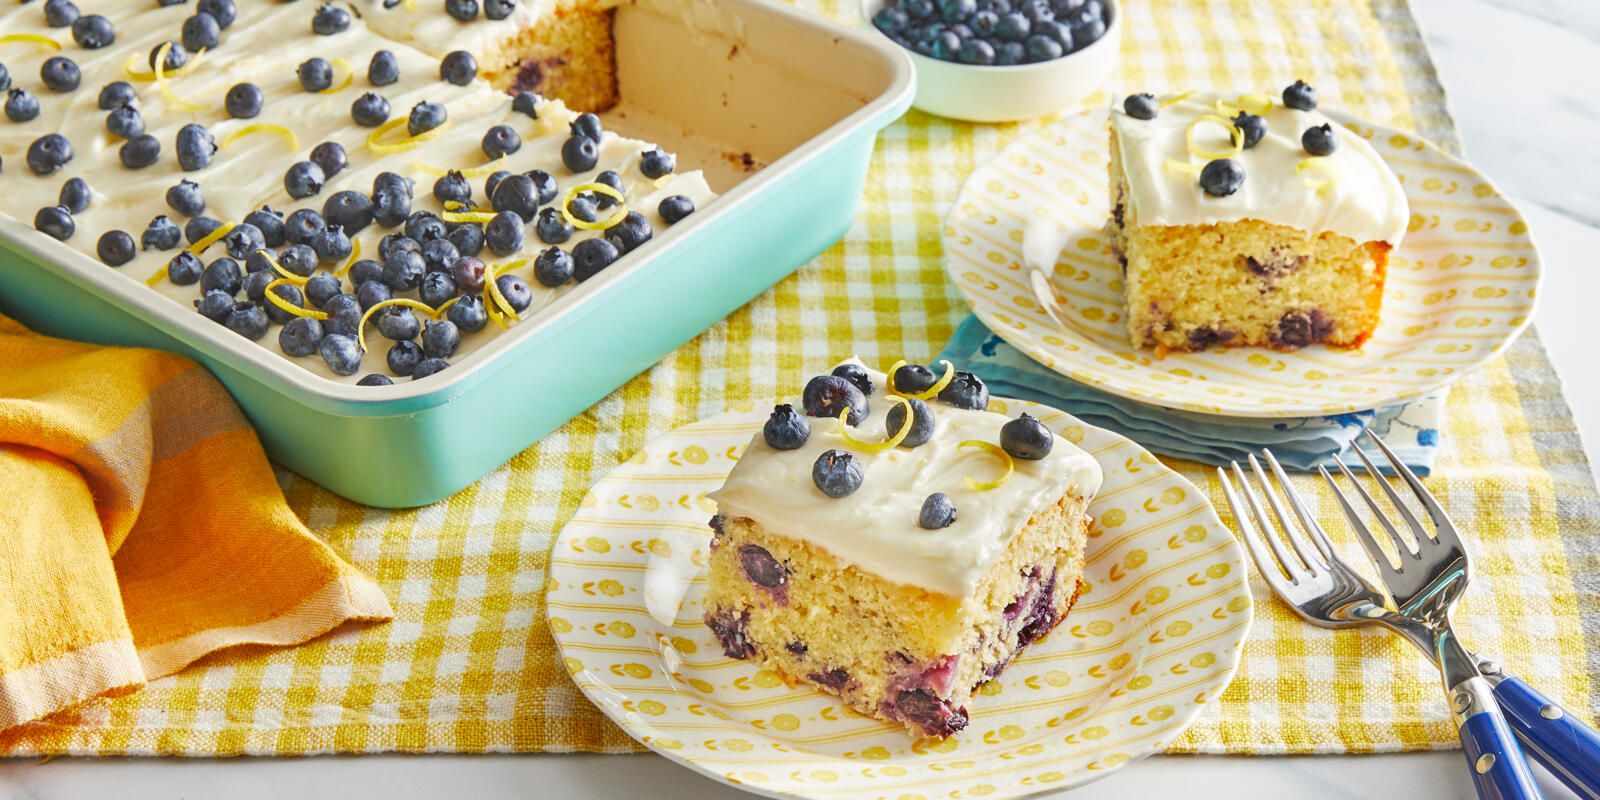 Blueberry Breakfast Cake- Just 3 grams carbs! - The Big Man's World ®